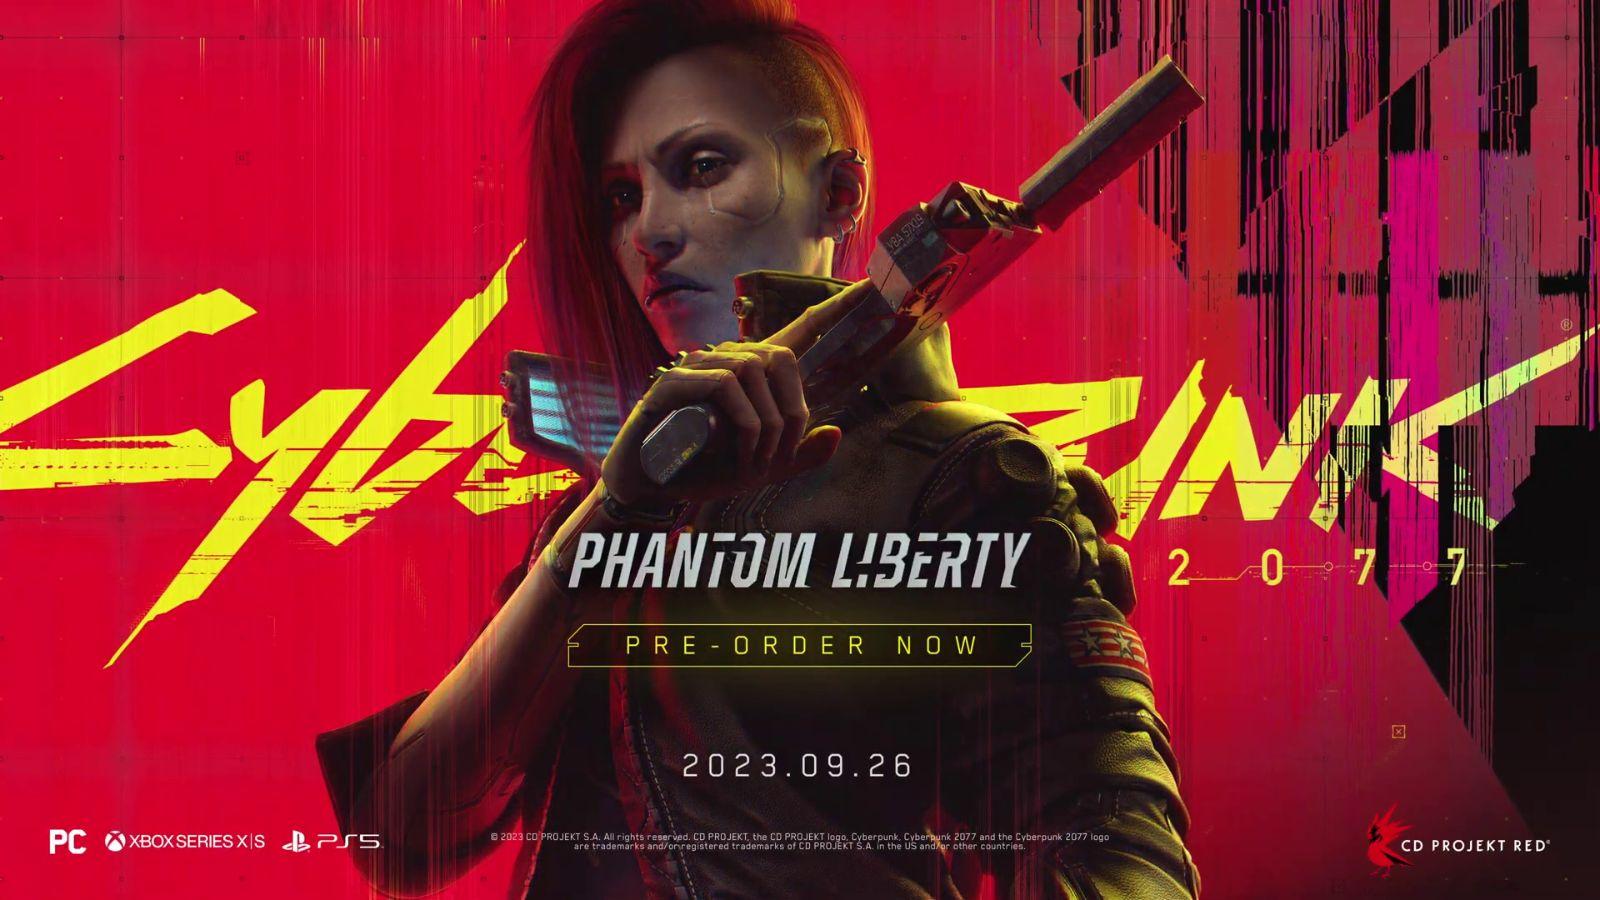 Cyberpunk 2077' next-gen upgrade will be free for PS4 and Xbox One